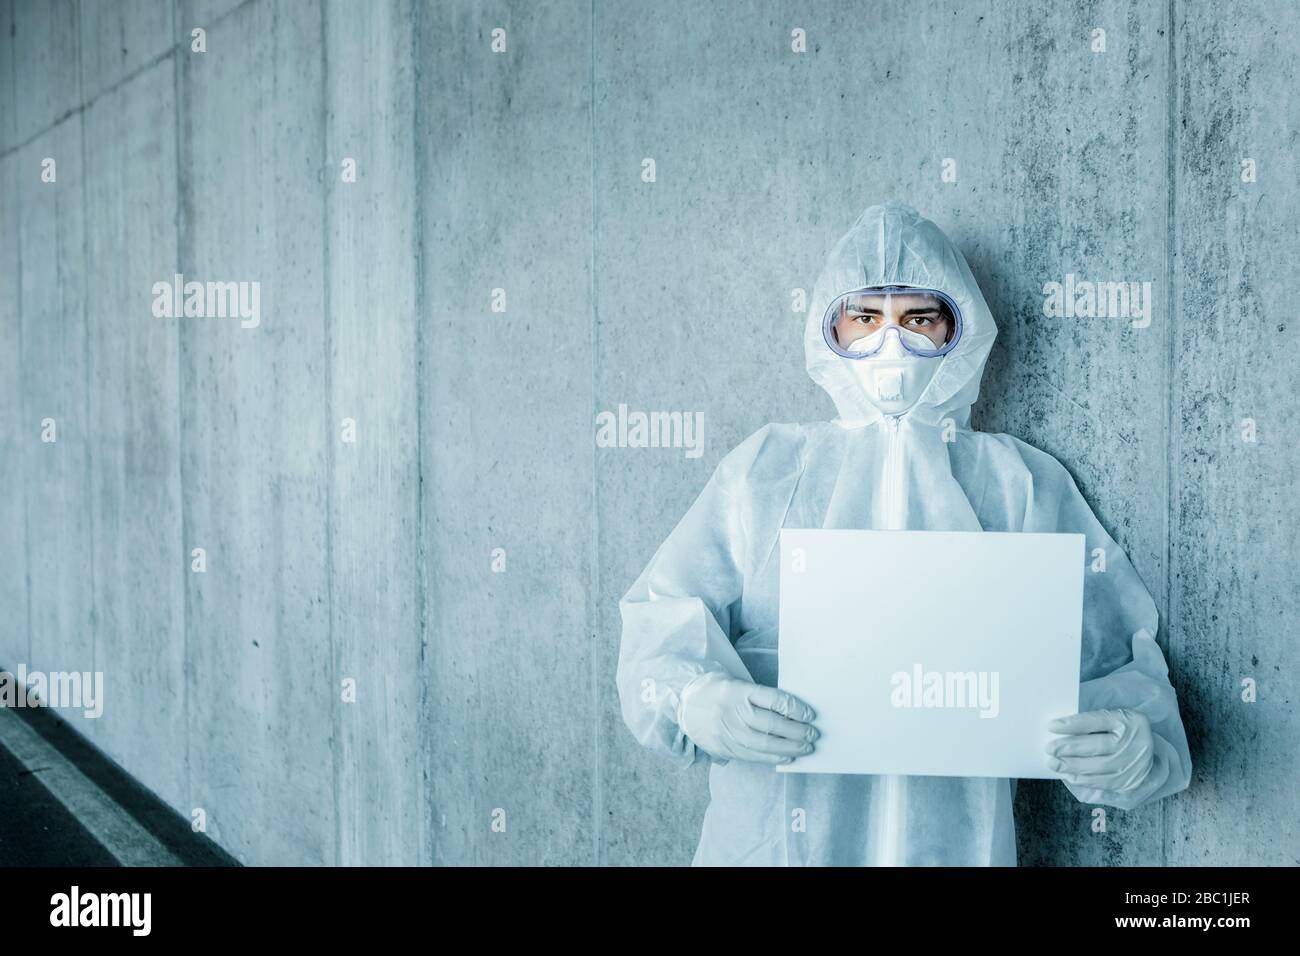 Portrait of man wearing protective clothing holding a blank sign Stock Photo